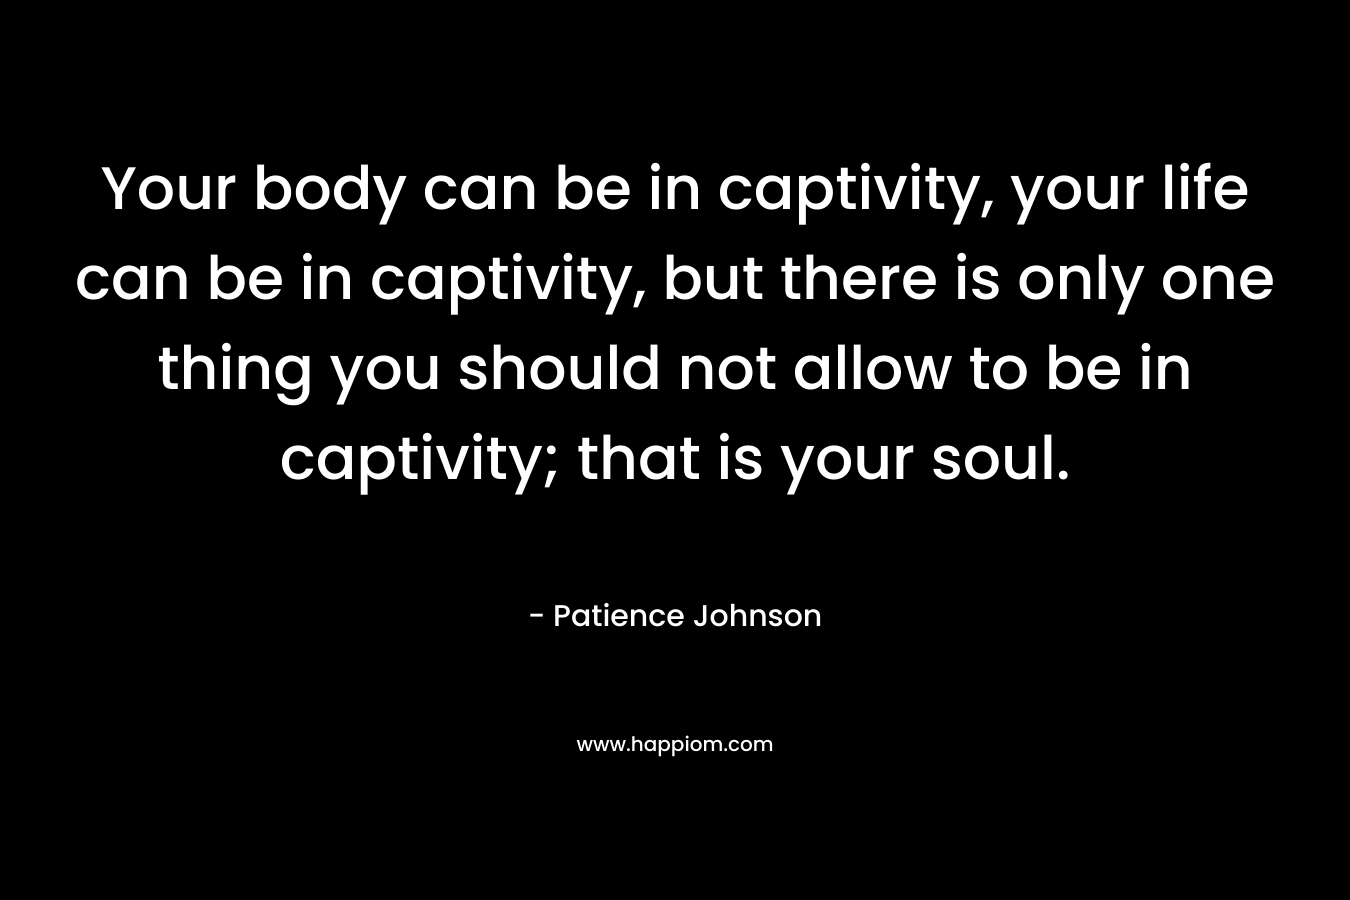 Your body can be in captivity, your life can be in captivity, but there is only one thing you should not allow to be in captivity; that is your soul. – Patience Johnson